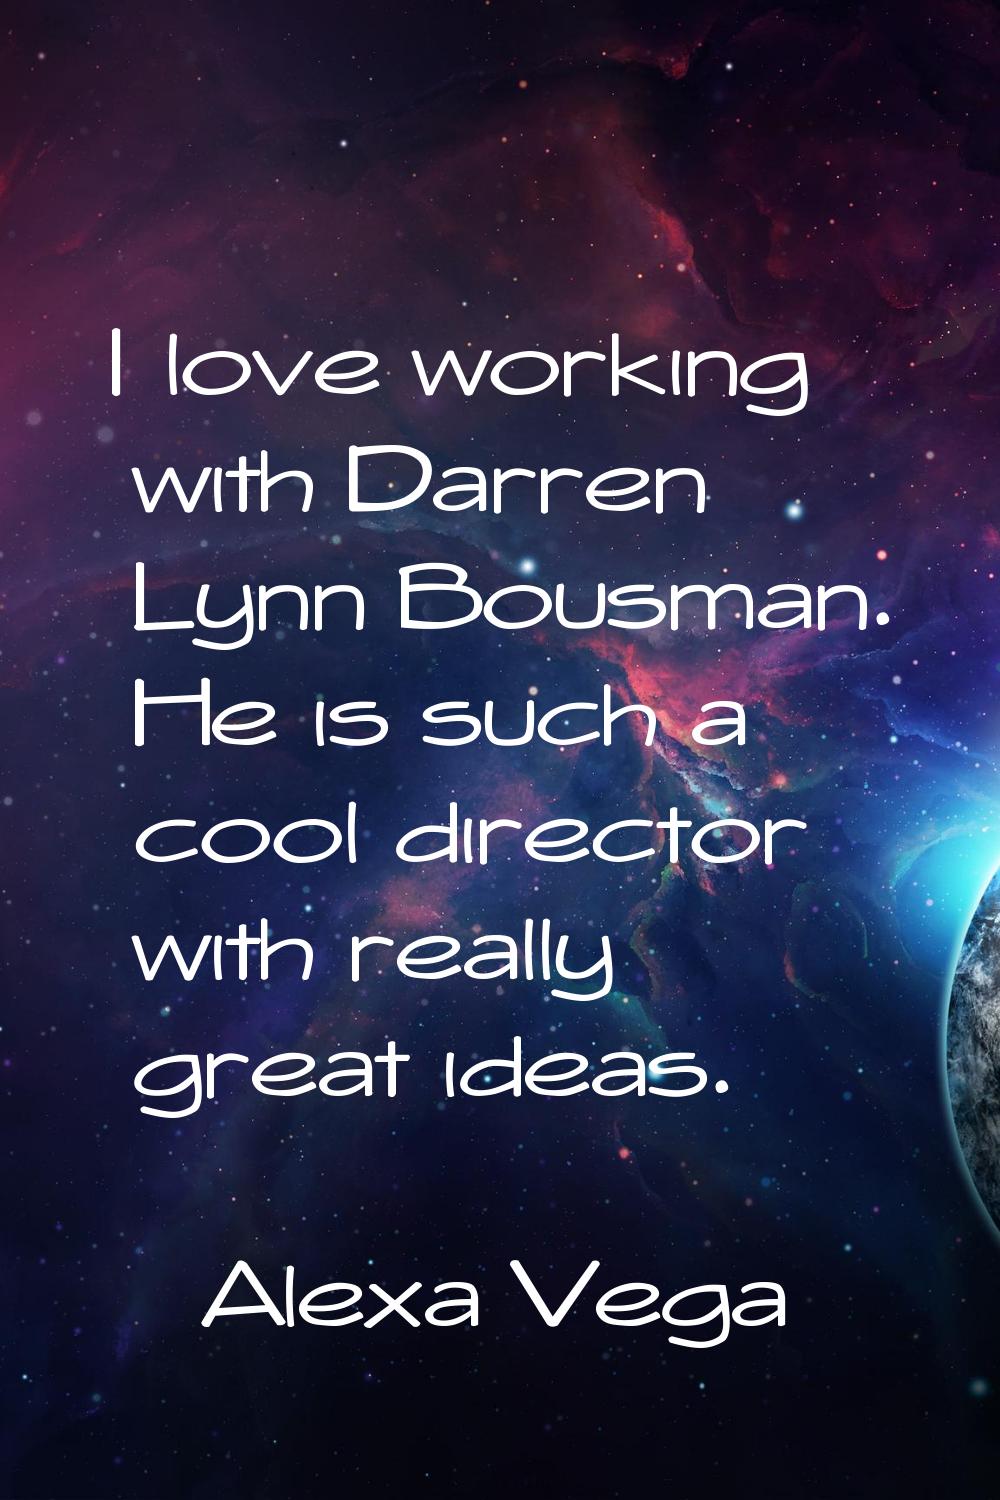 I love working with Darren Lynn Bousman. He is such a cool director with really great ideas.